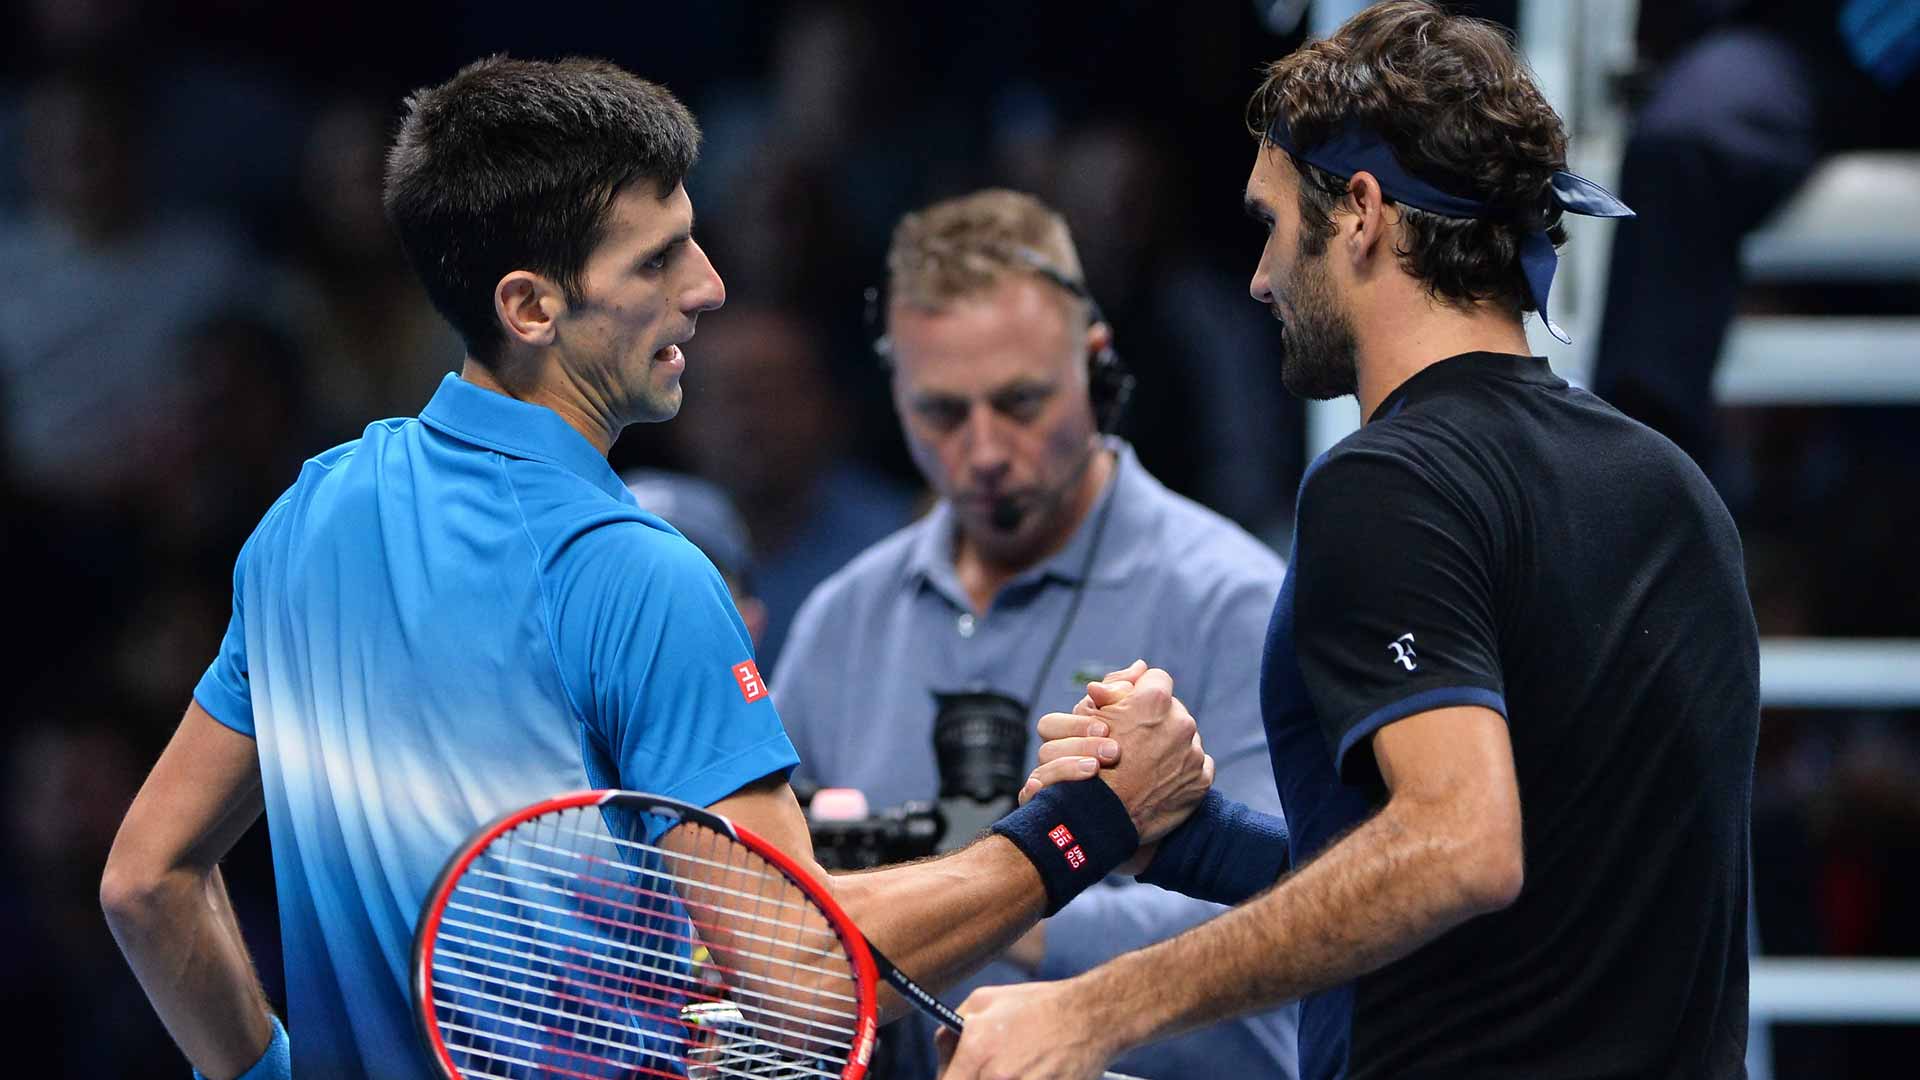 Novak Djokovic and Roger Federer will meet for the sixth time at the Nitto ATP Finals on Thursday evening.